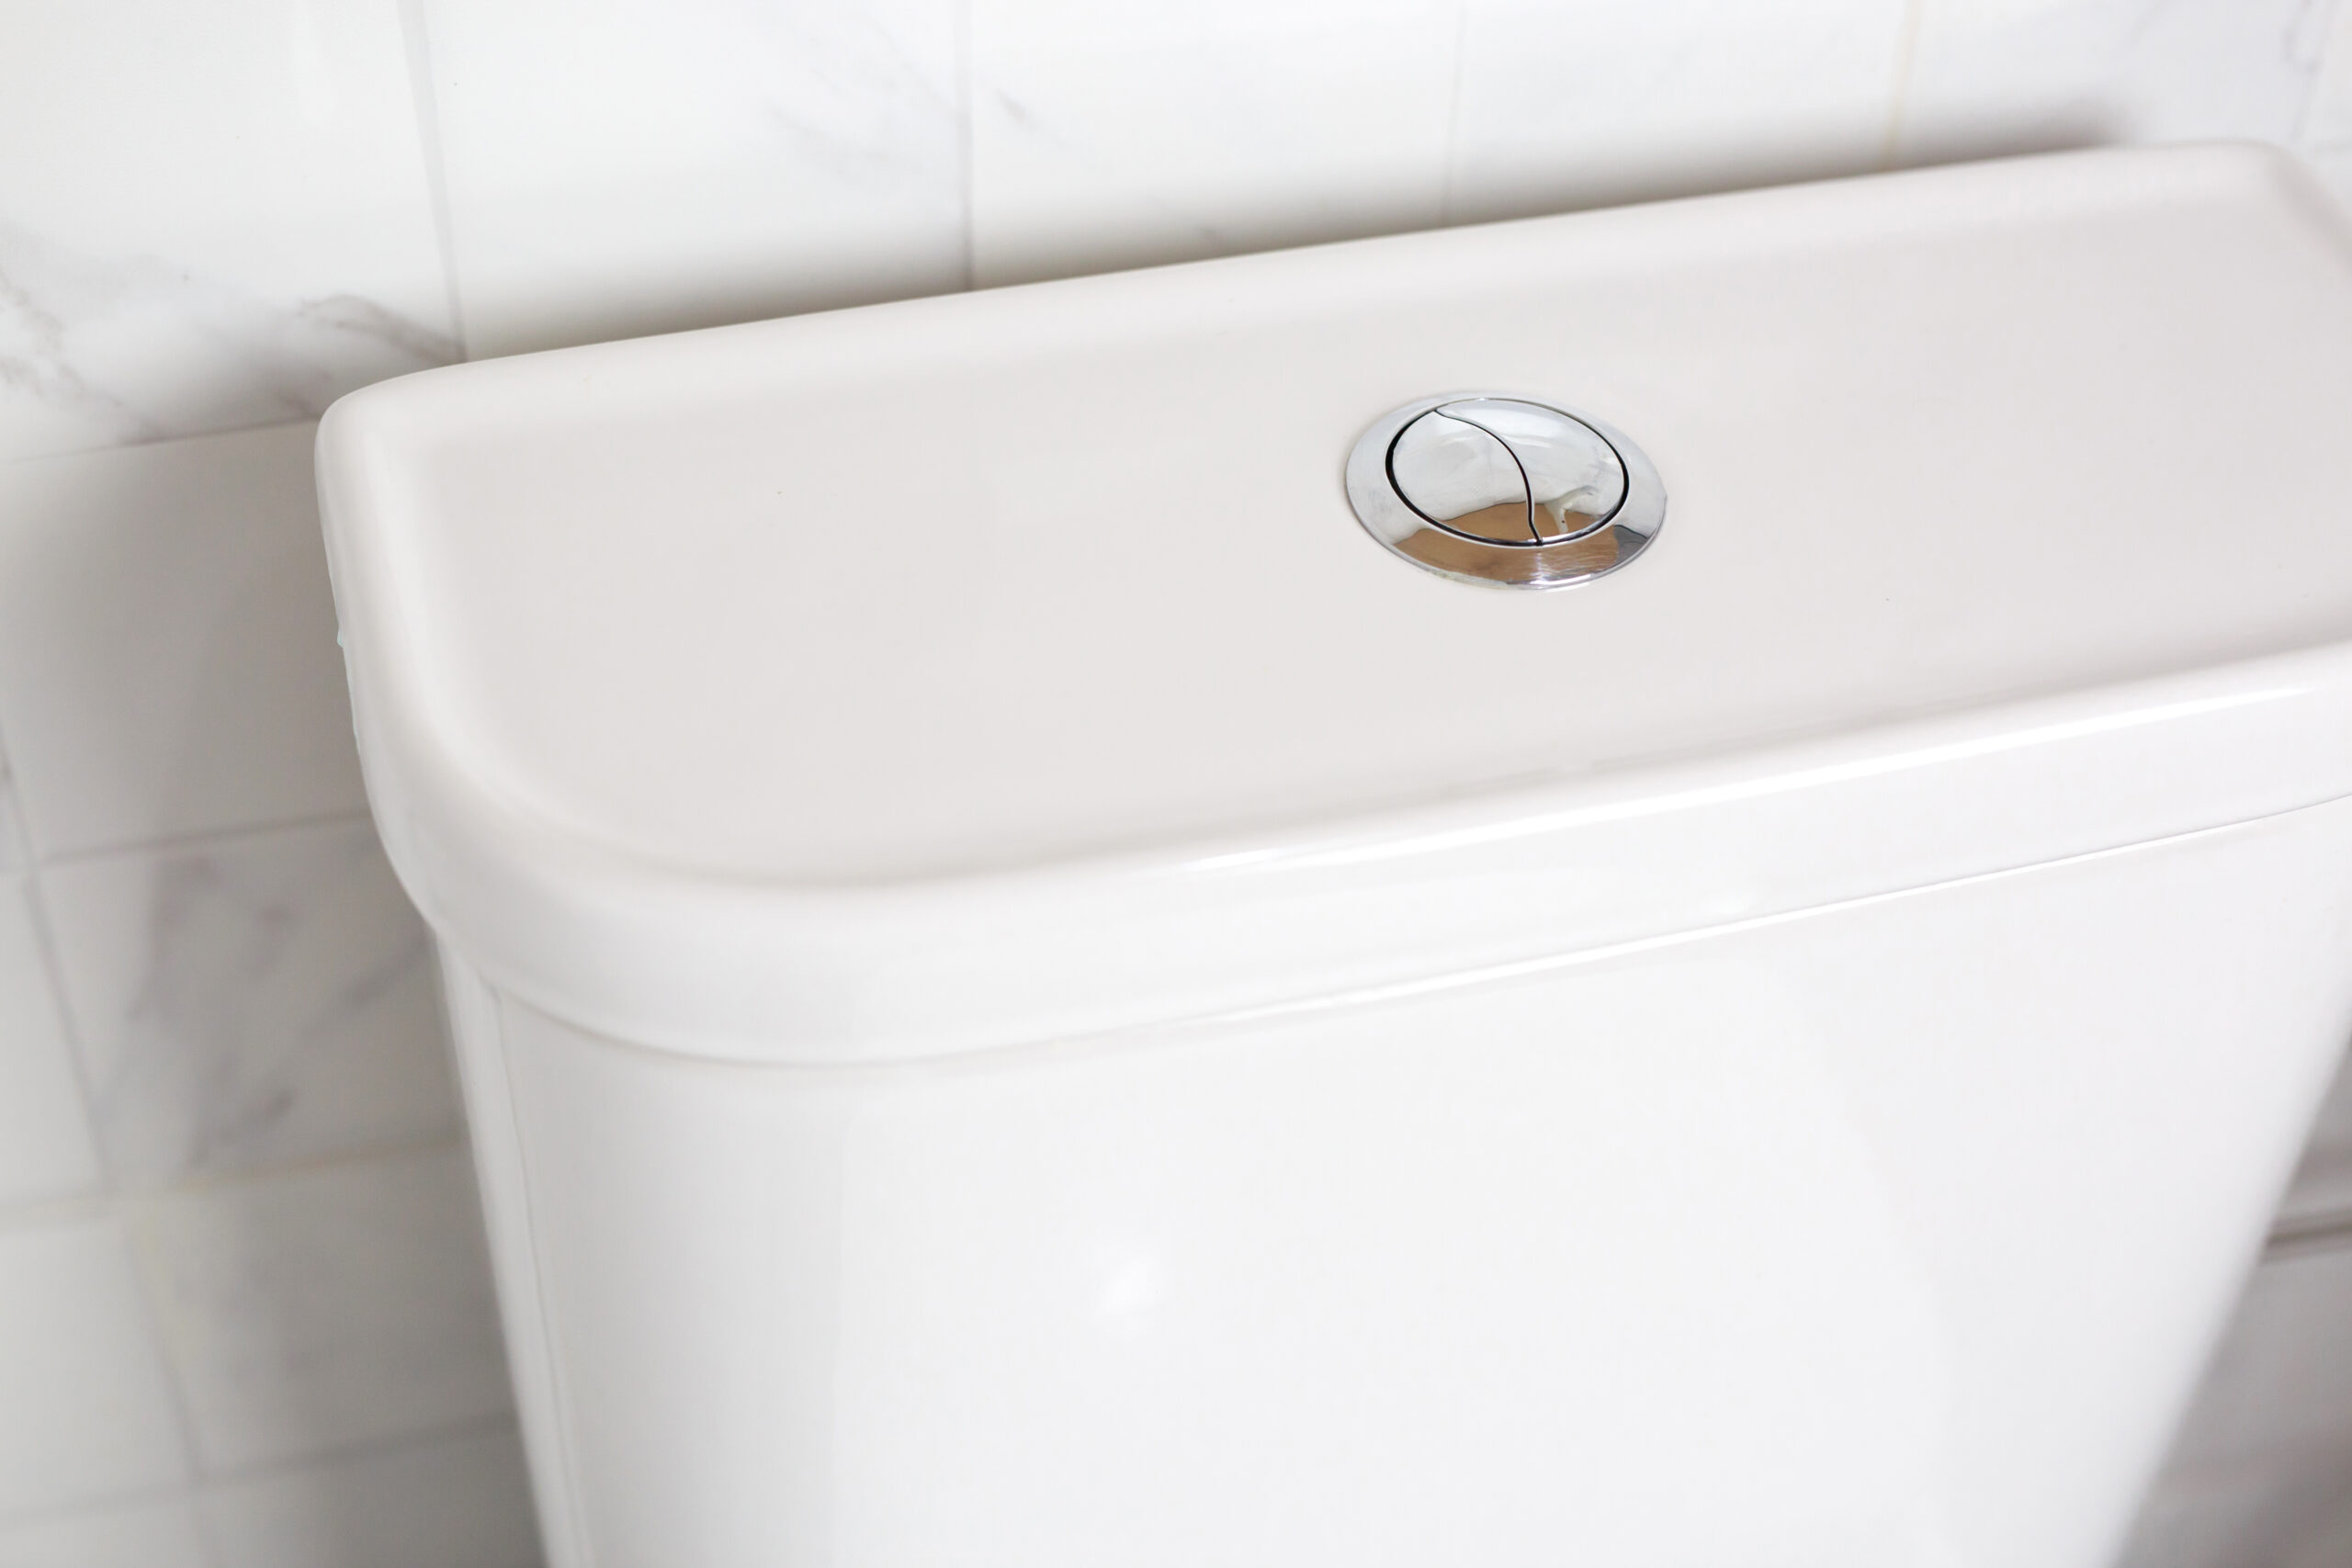 Close-up of an upgraded, low-flow toilet that features two buttons that can flush different amounts of water.